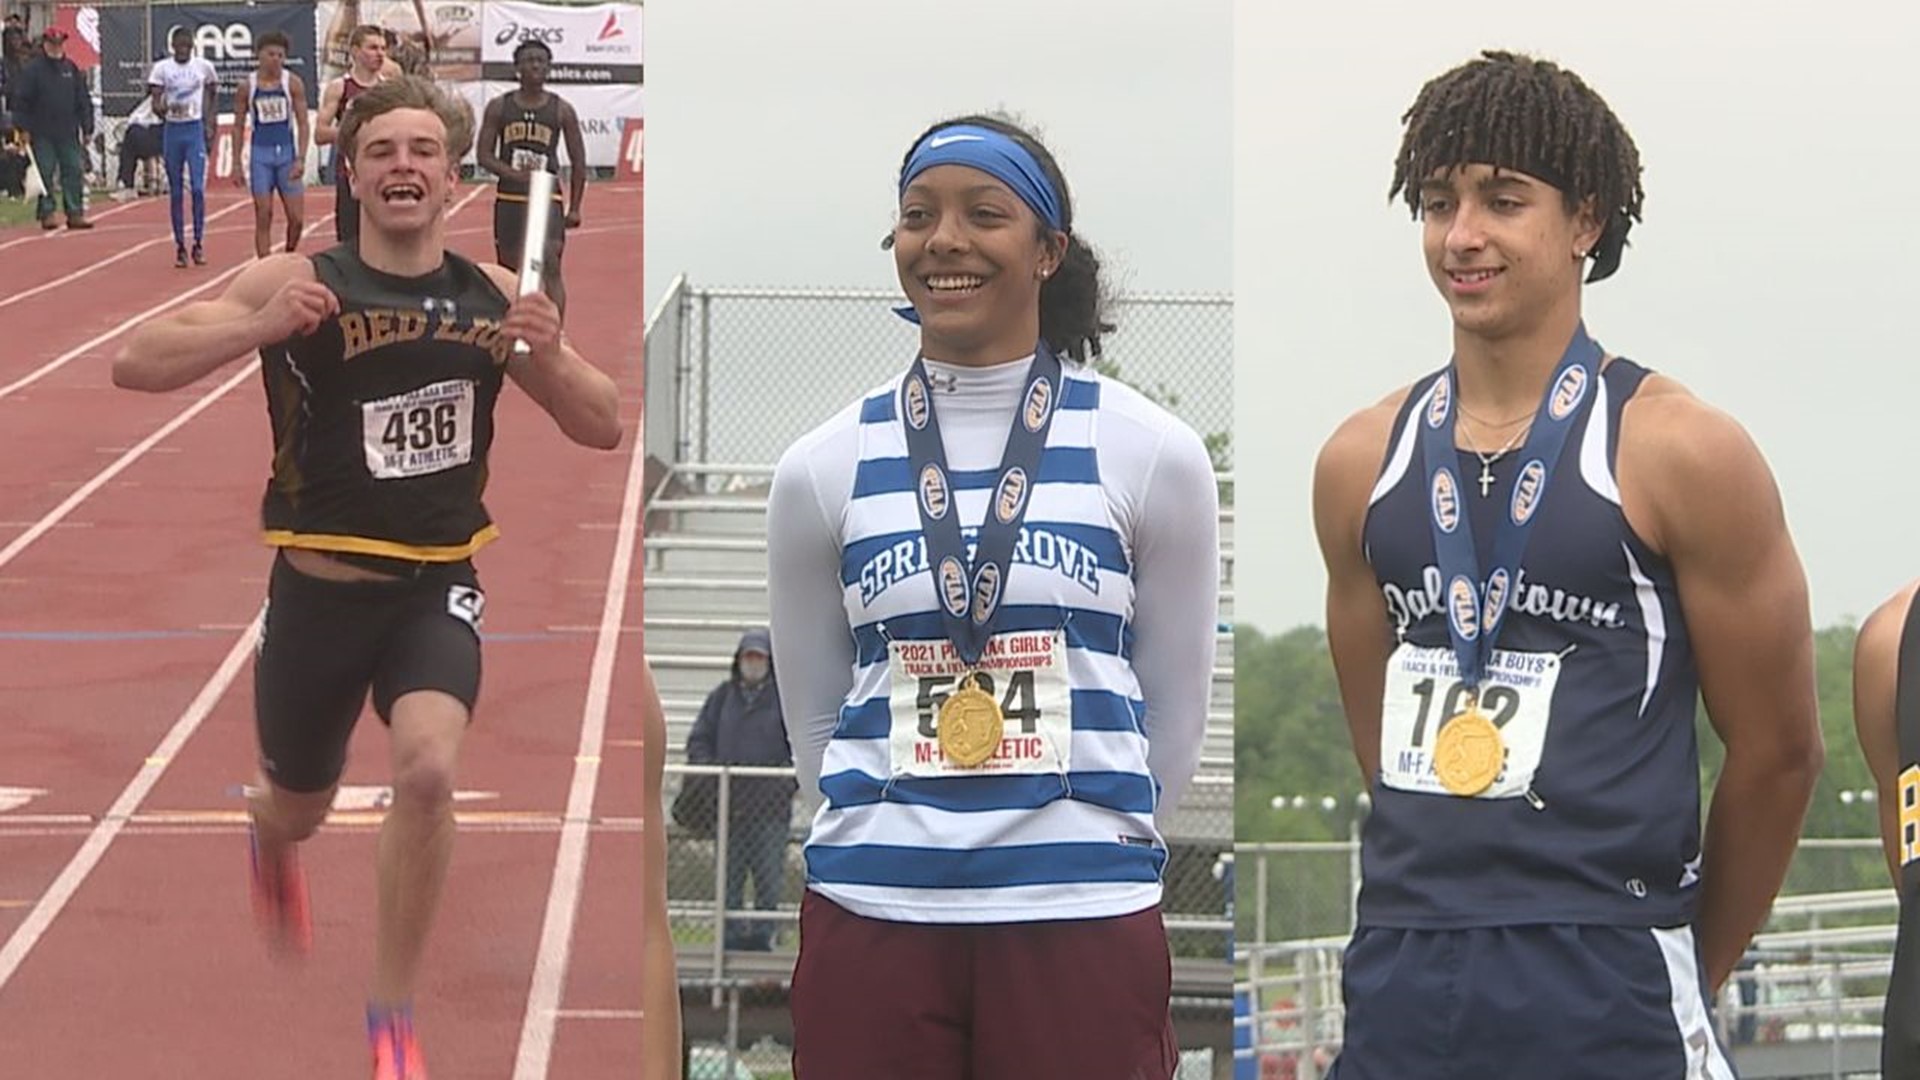 Local students athletes helped lock up gold medals in nine events on Saturday.